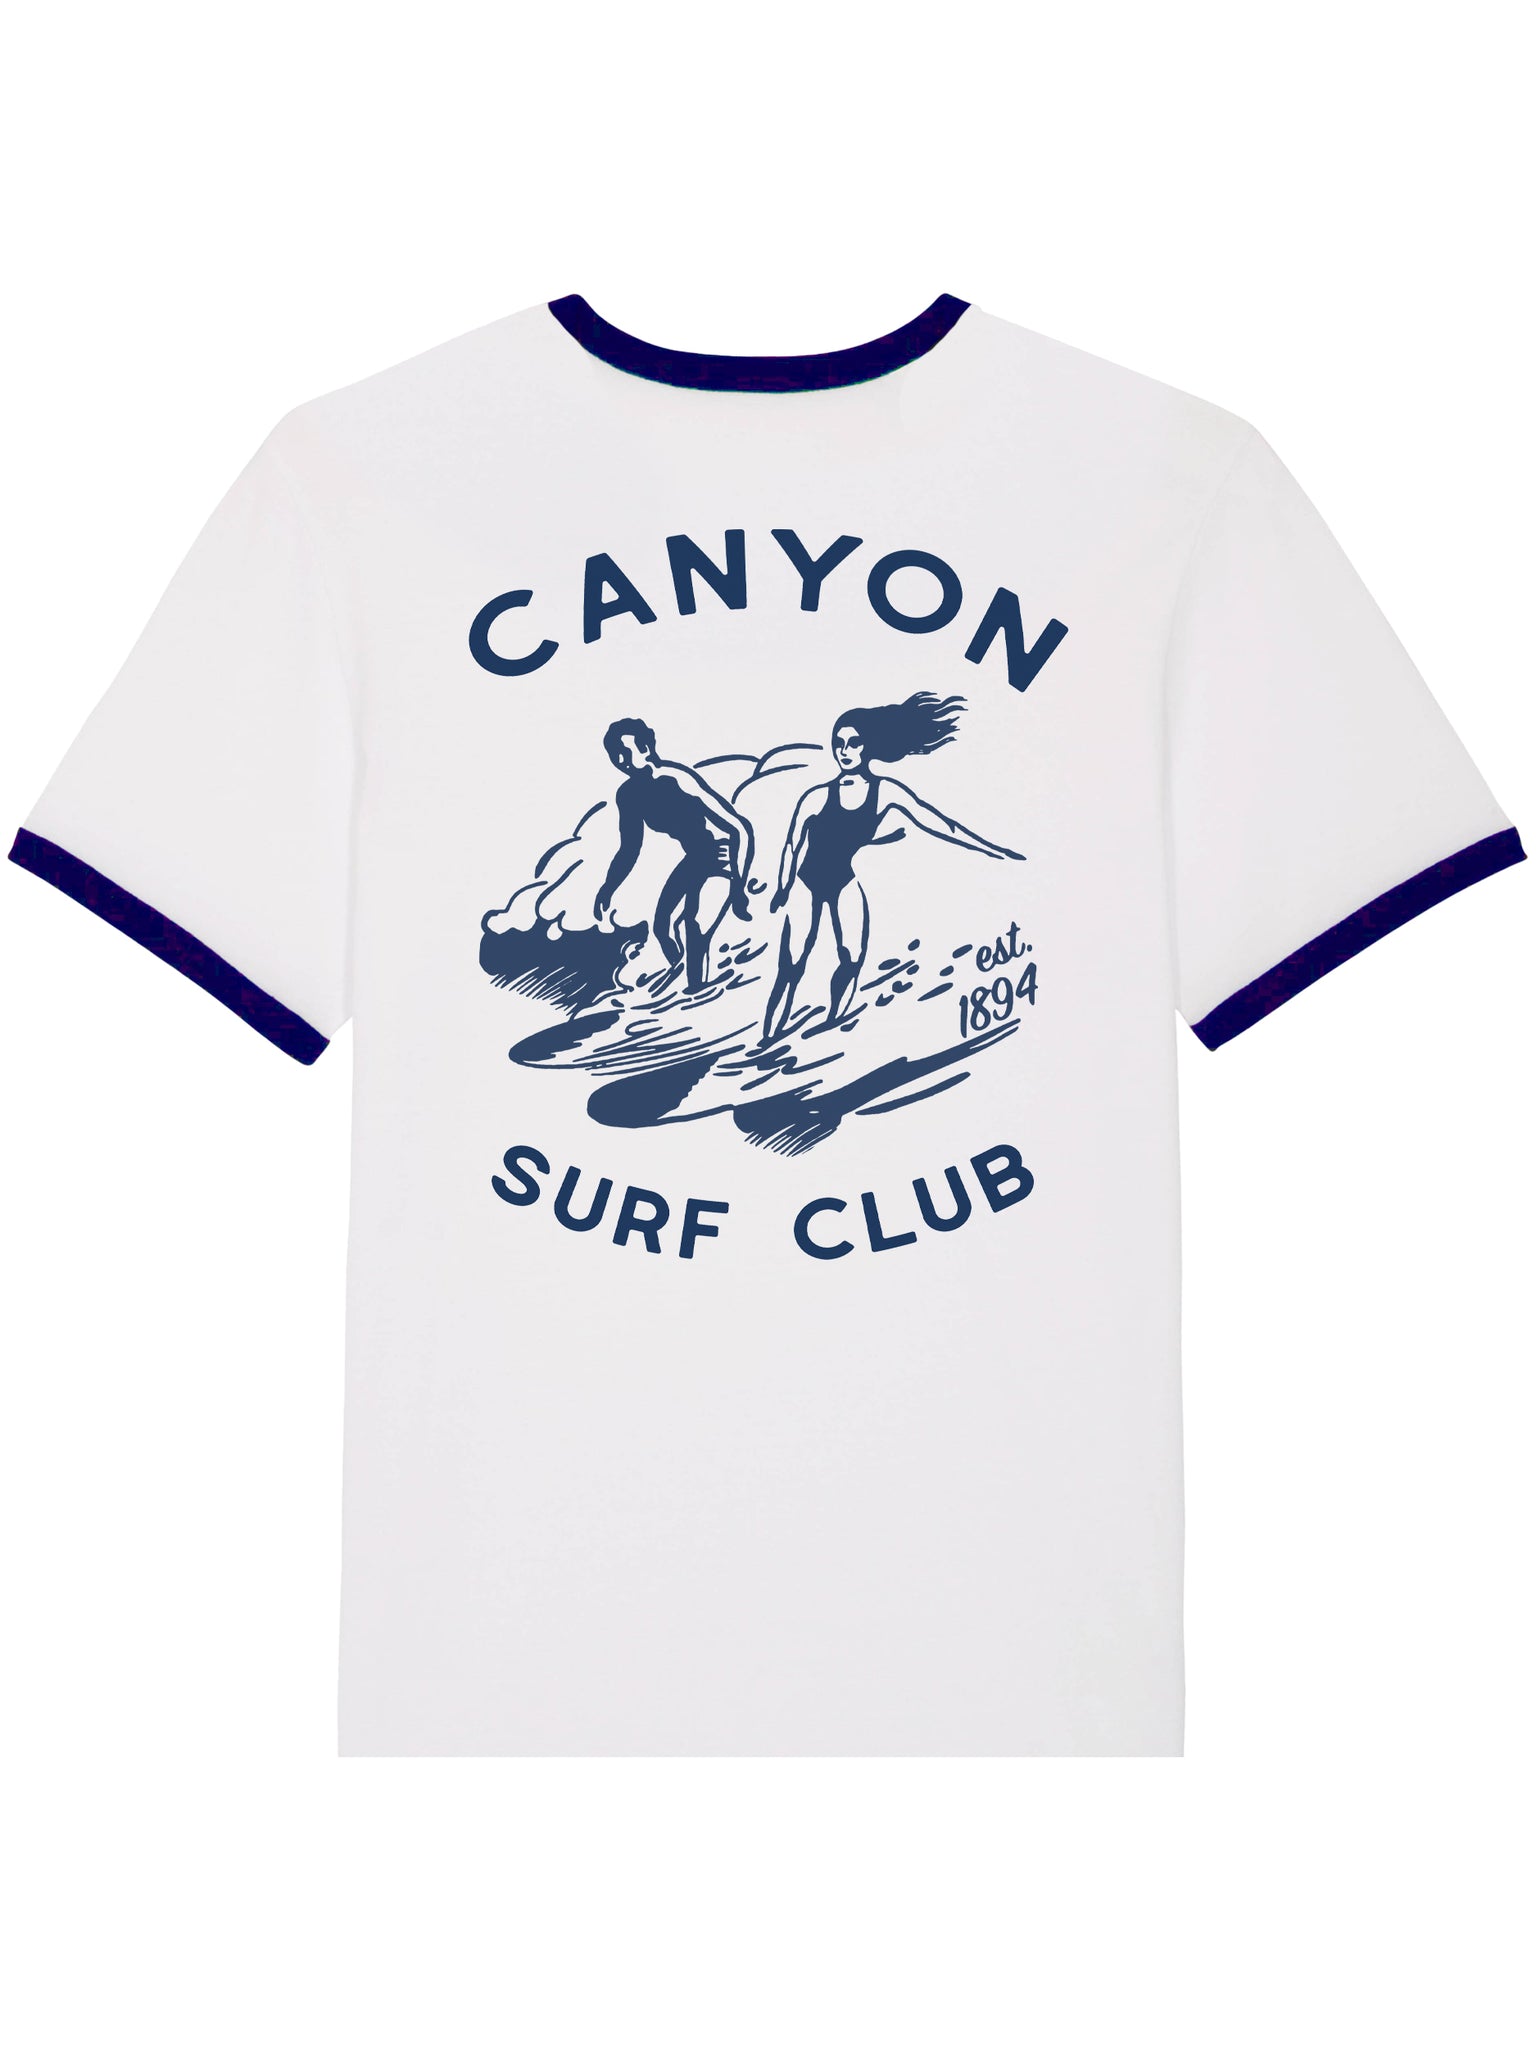 Canyon Surf Club Youth Ringer Tee